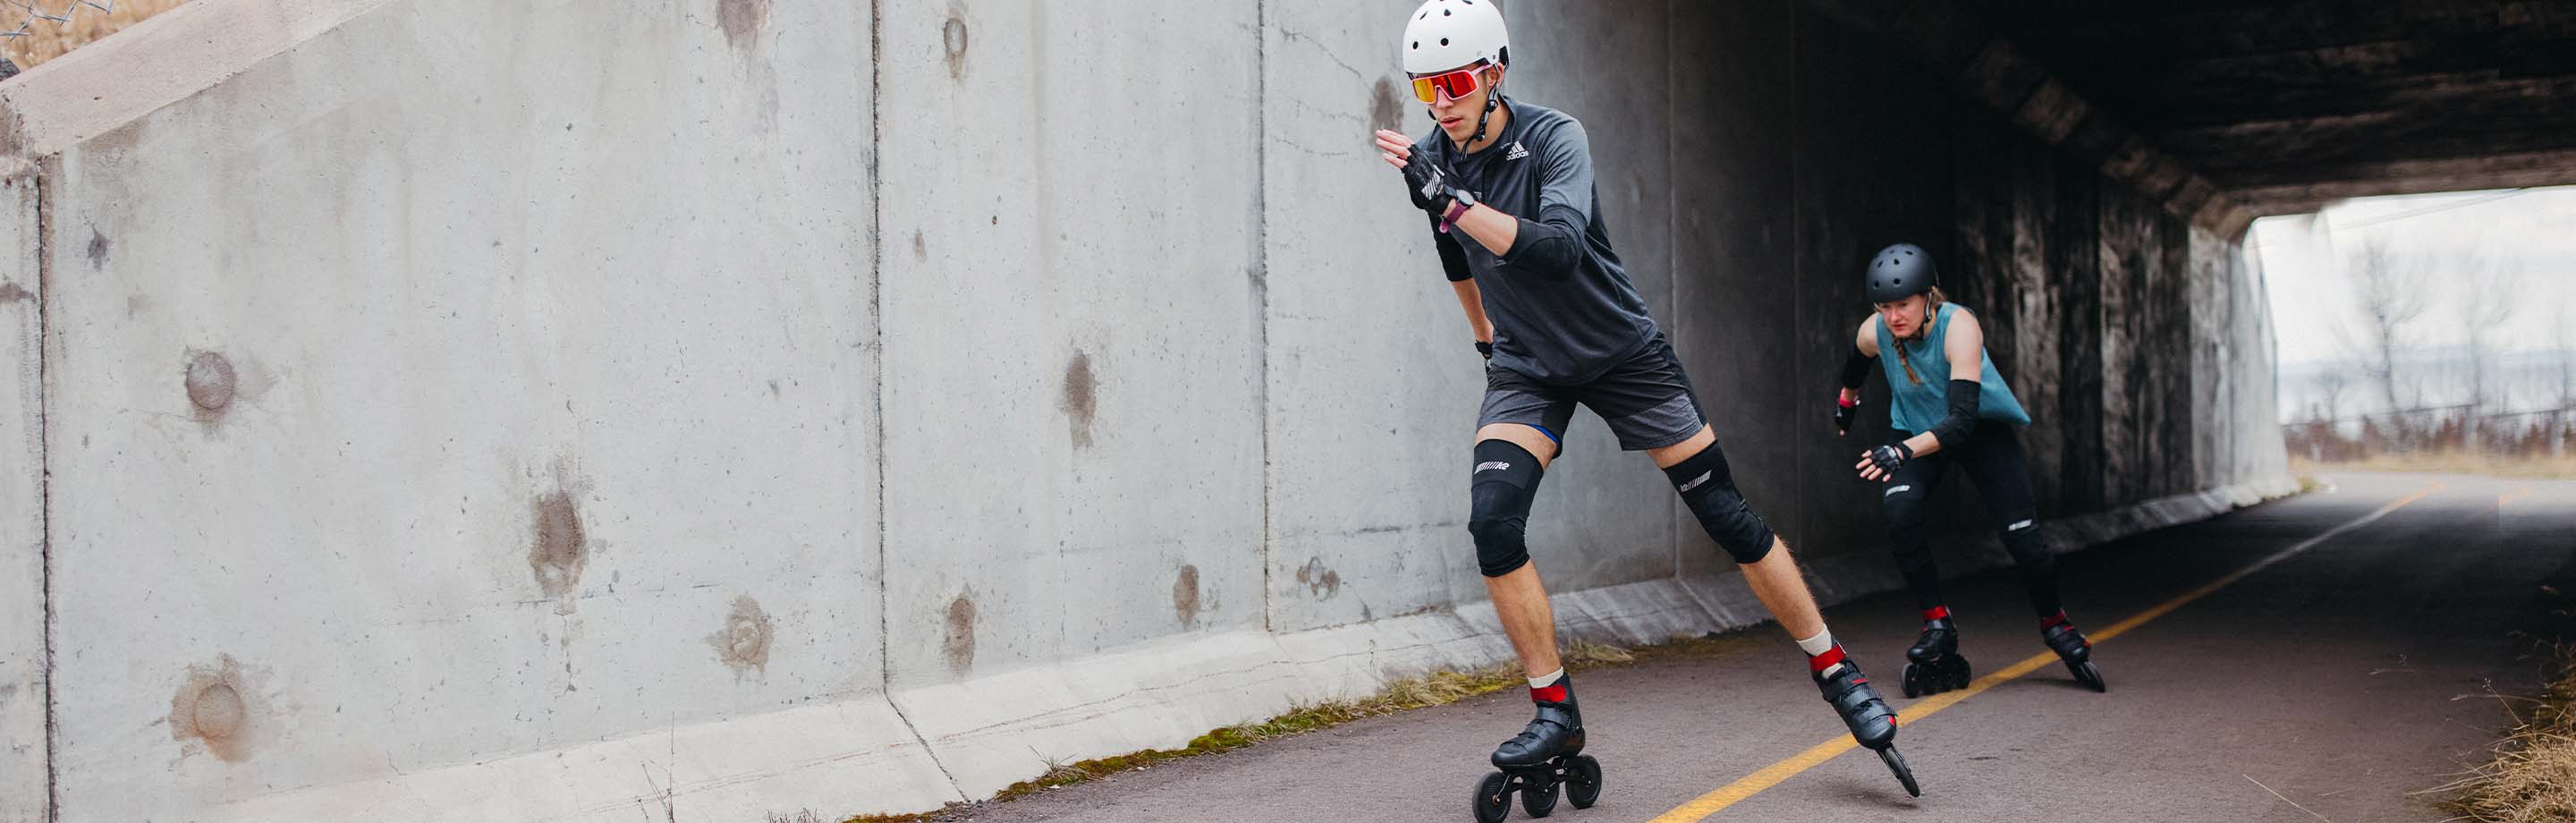 K2 Skates - Inline Skates from the Iconic Brand for Fitness and Ambitious Training